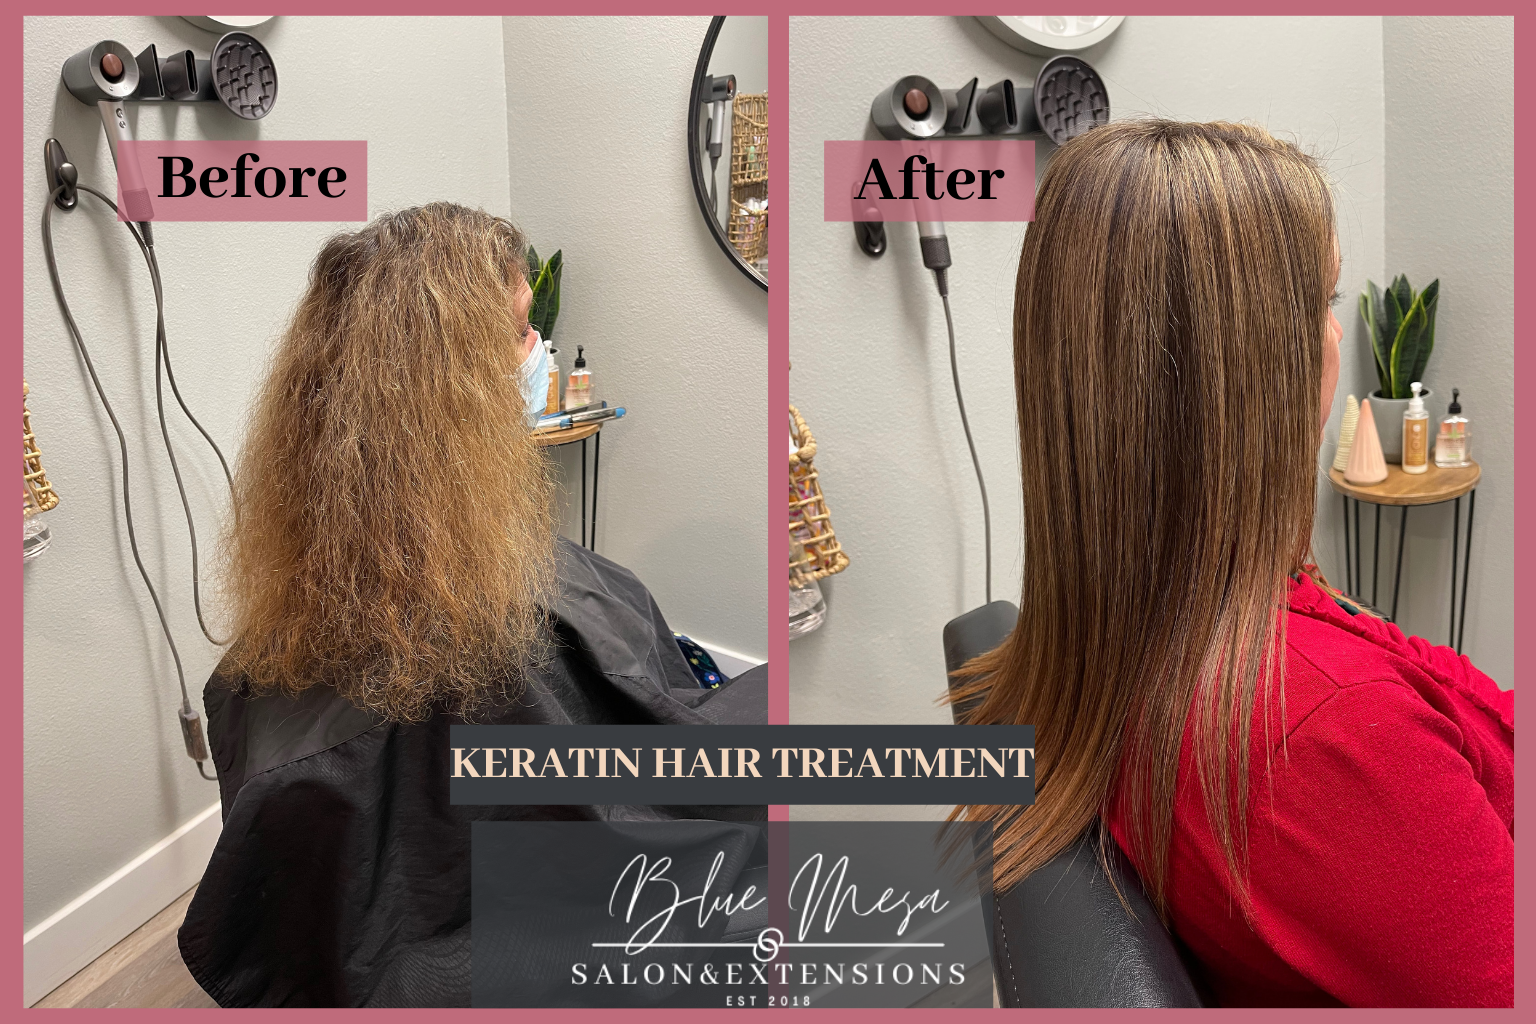 How to get perfectly smooth silky hair with our keratin hair treatment -  Blue Mesa Salon and Extensions